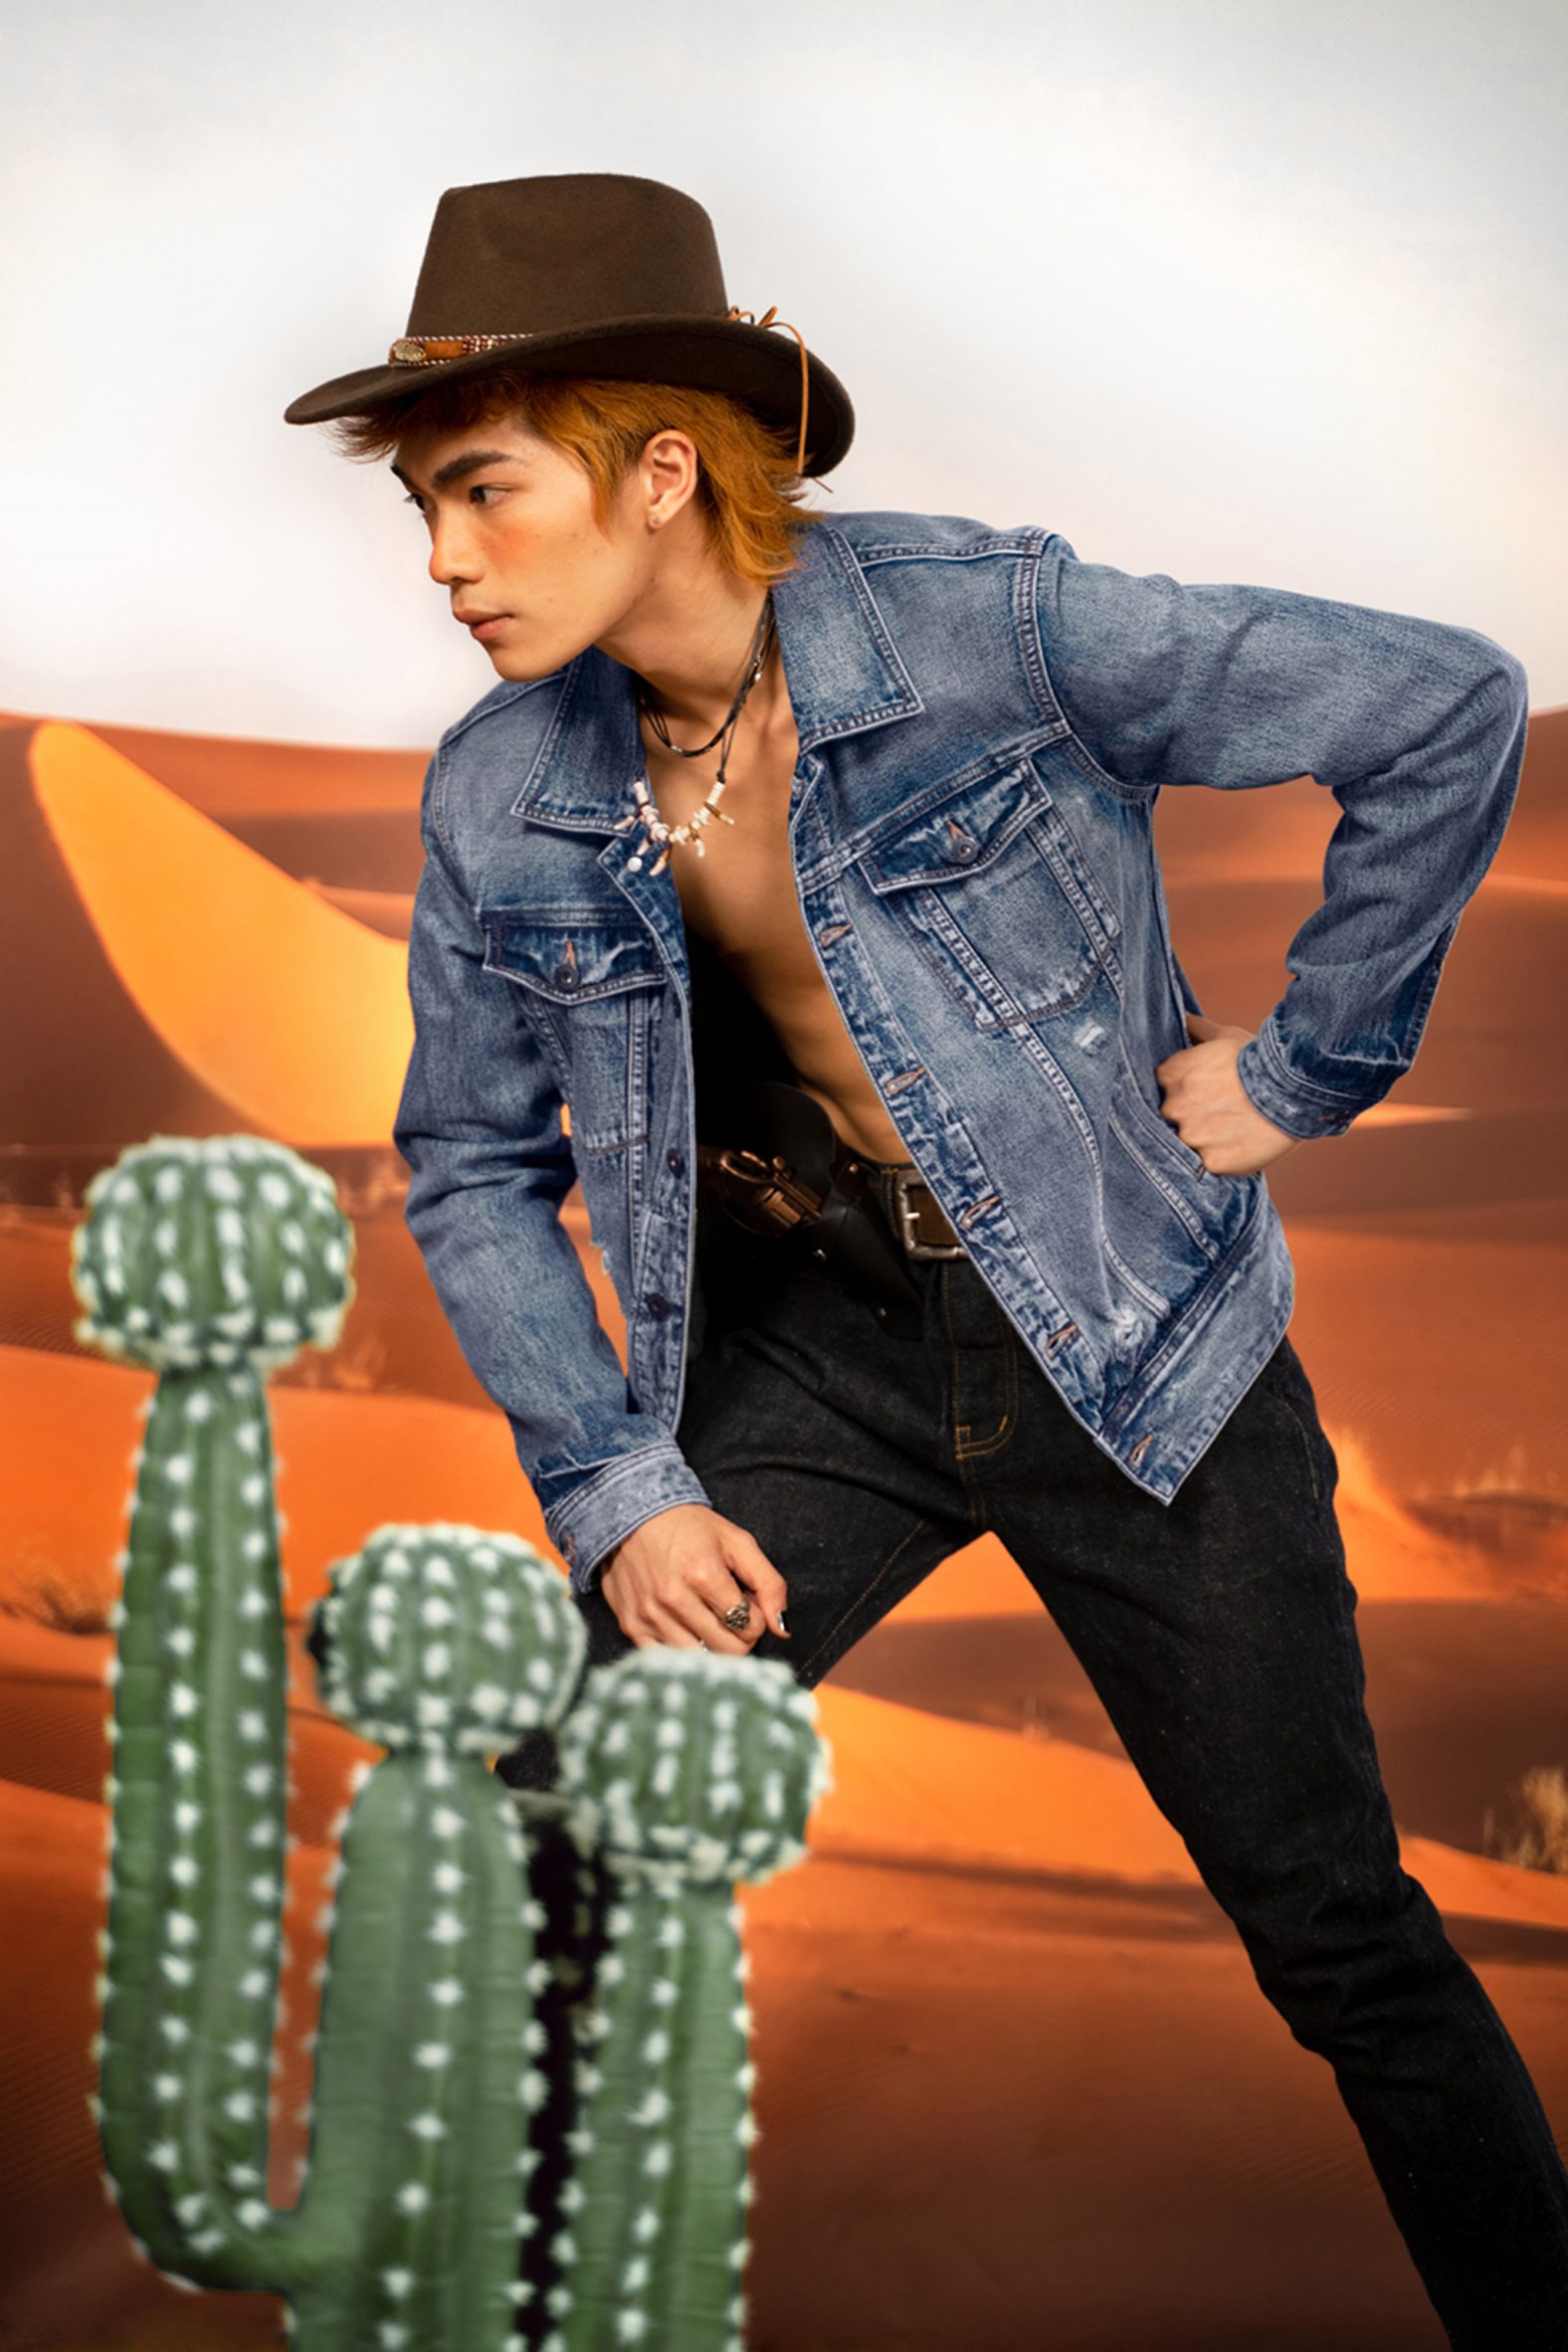 Photograph of cowboy in desert setting